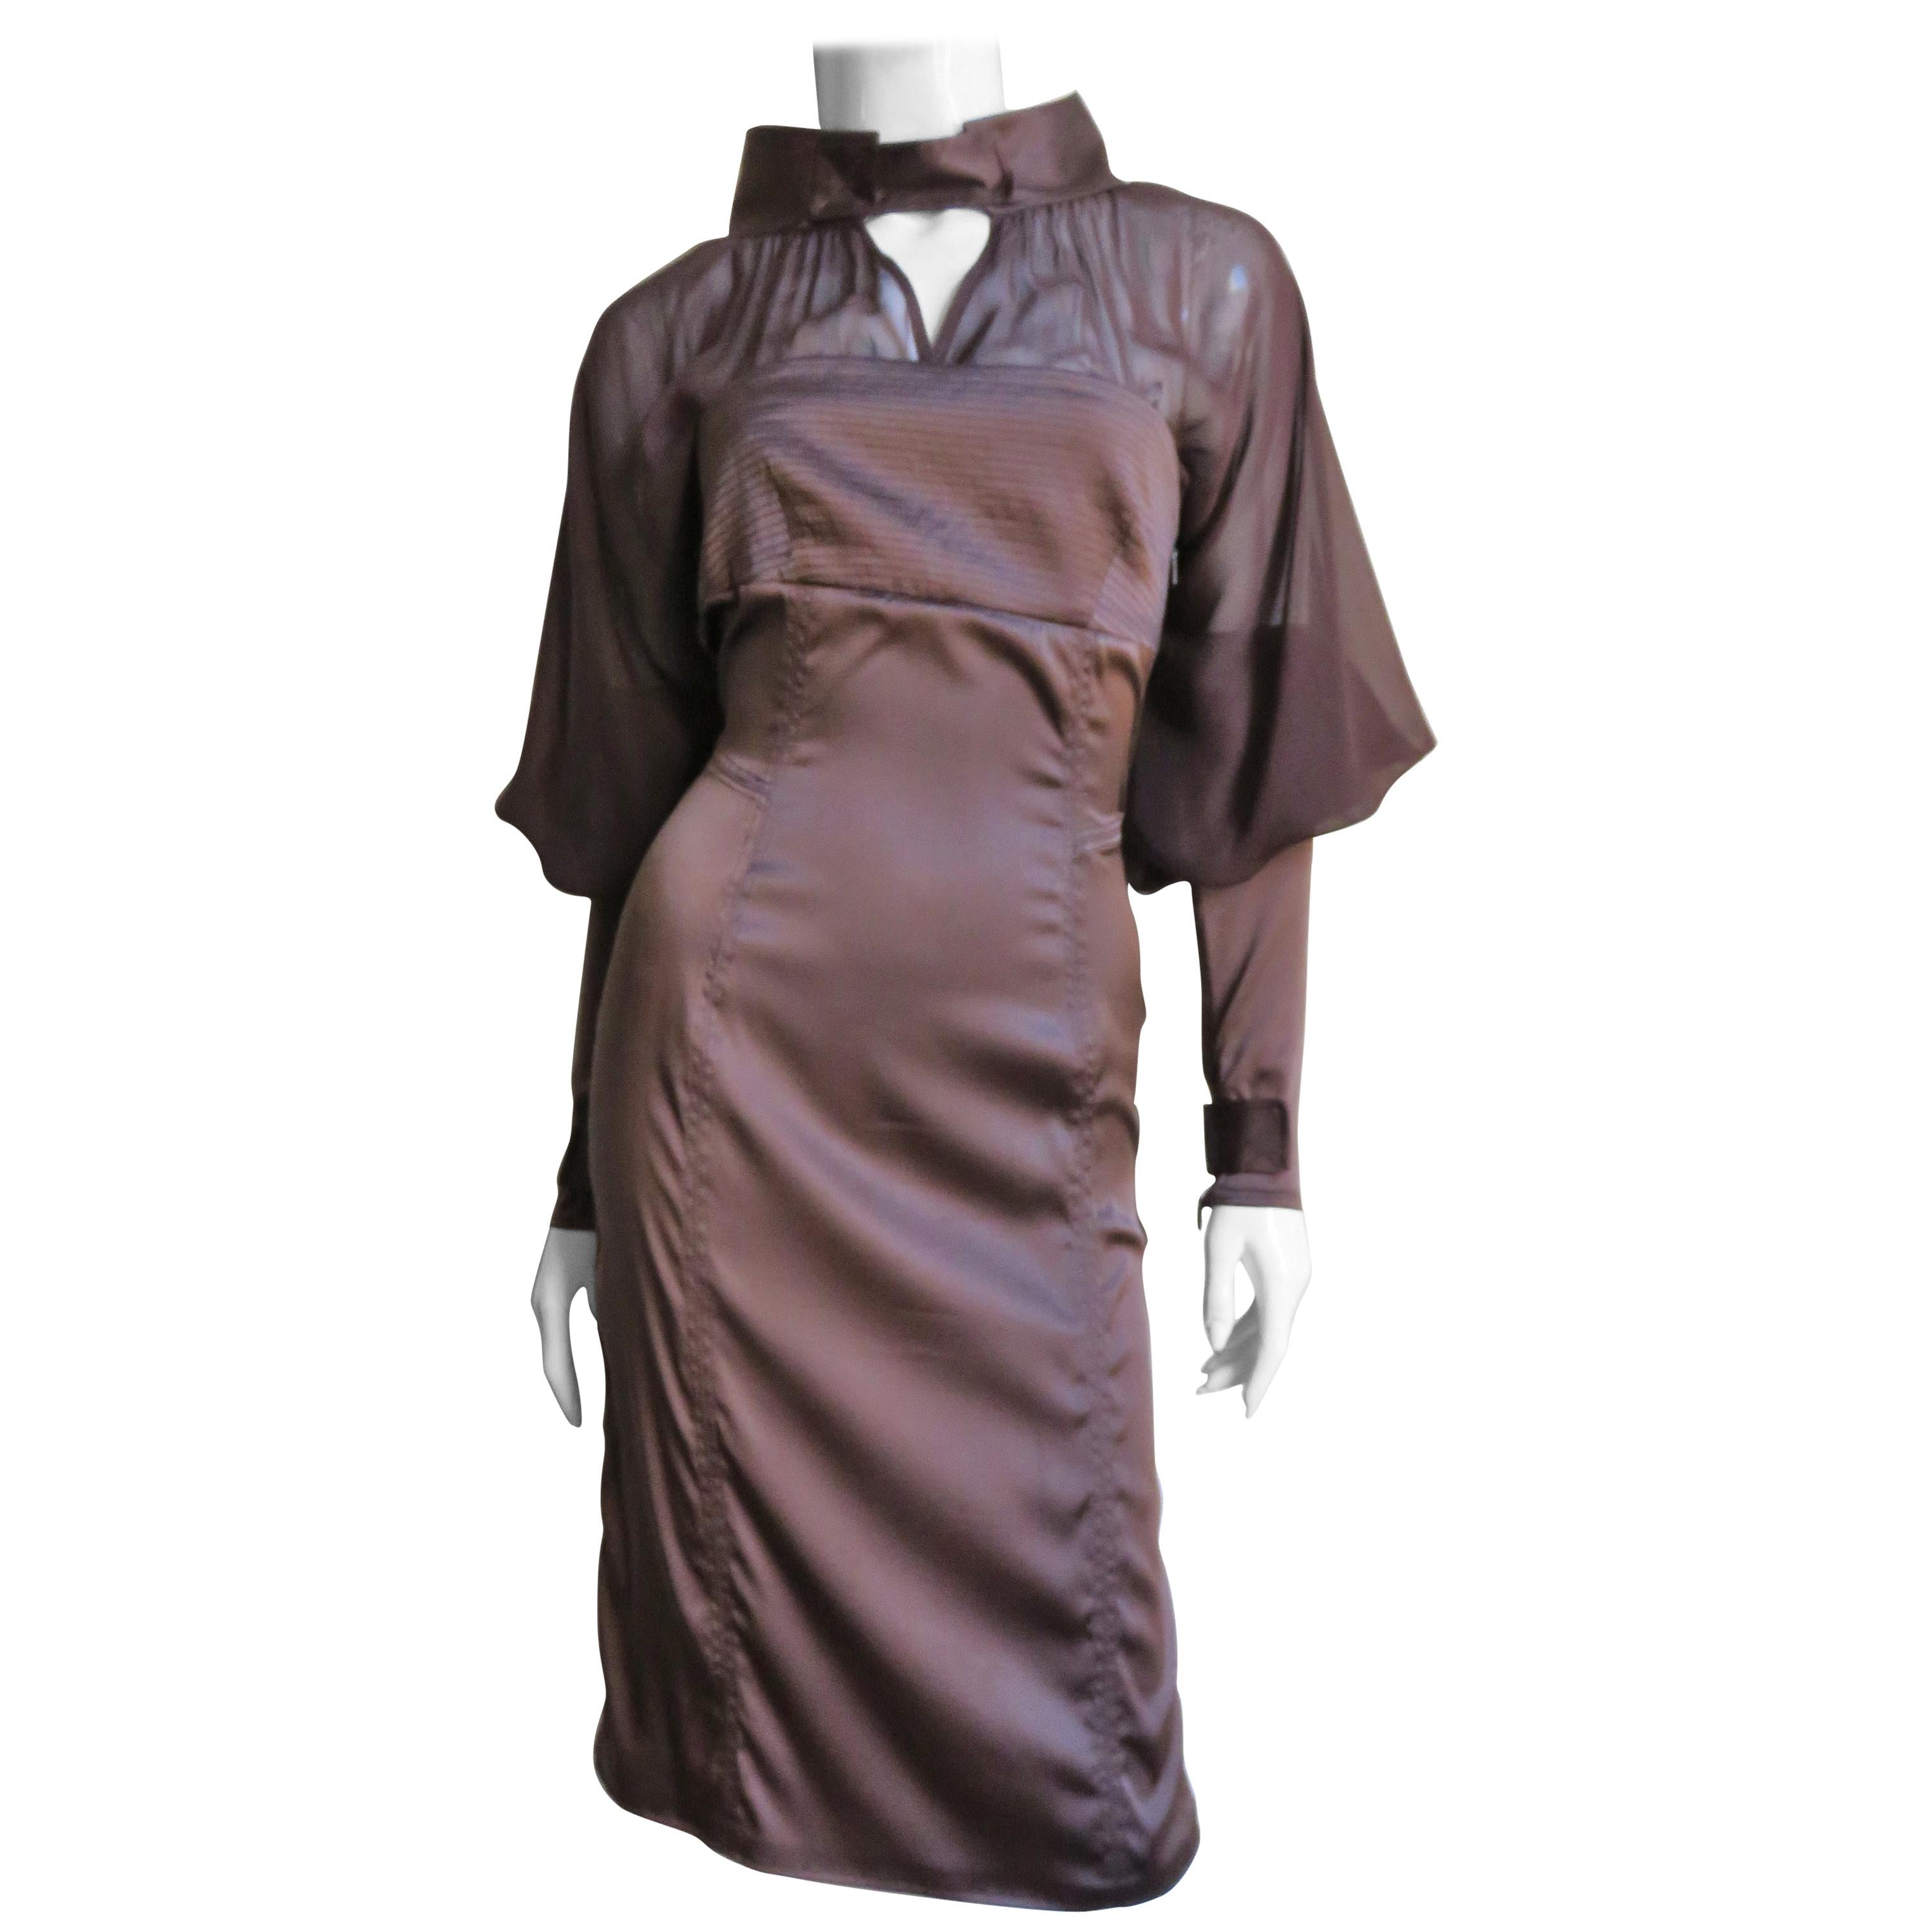 A gorgeous rich brown fine stretch silk dress from Tom Ford for Gucci. The dress portion is strapless then it is sheer to the stand up collar at the neck and to the elbows of the dramatic leg of mutton sleeves which are opaque from elbows to the